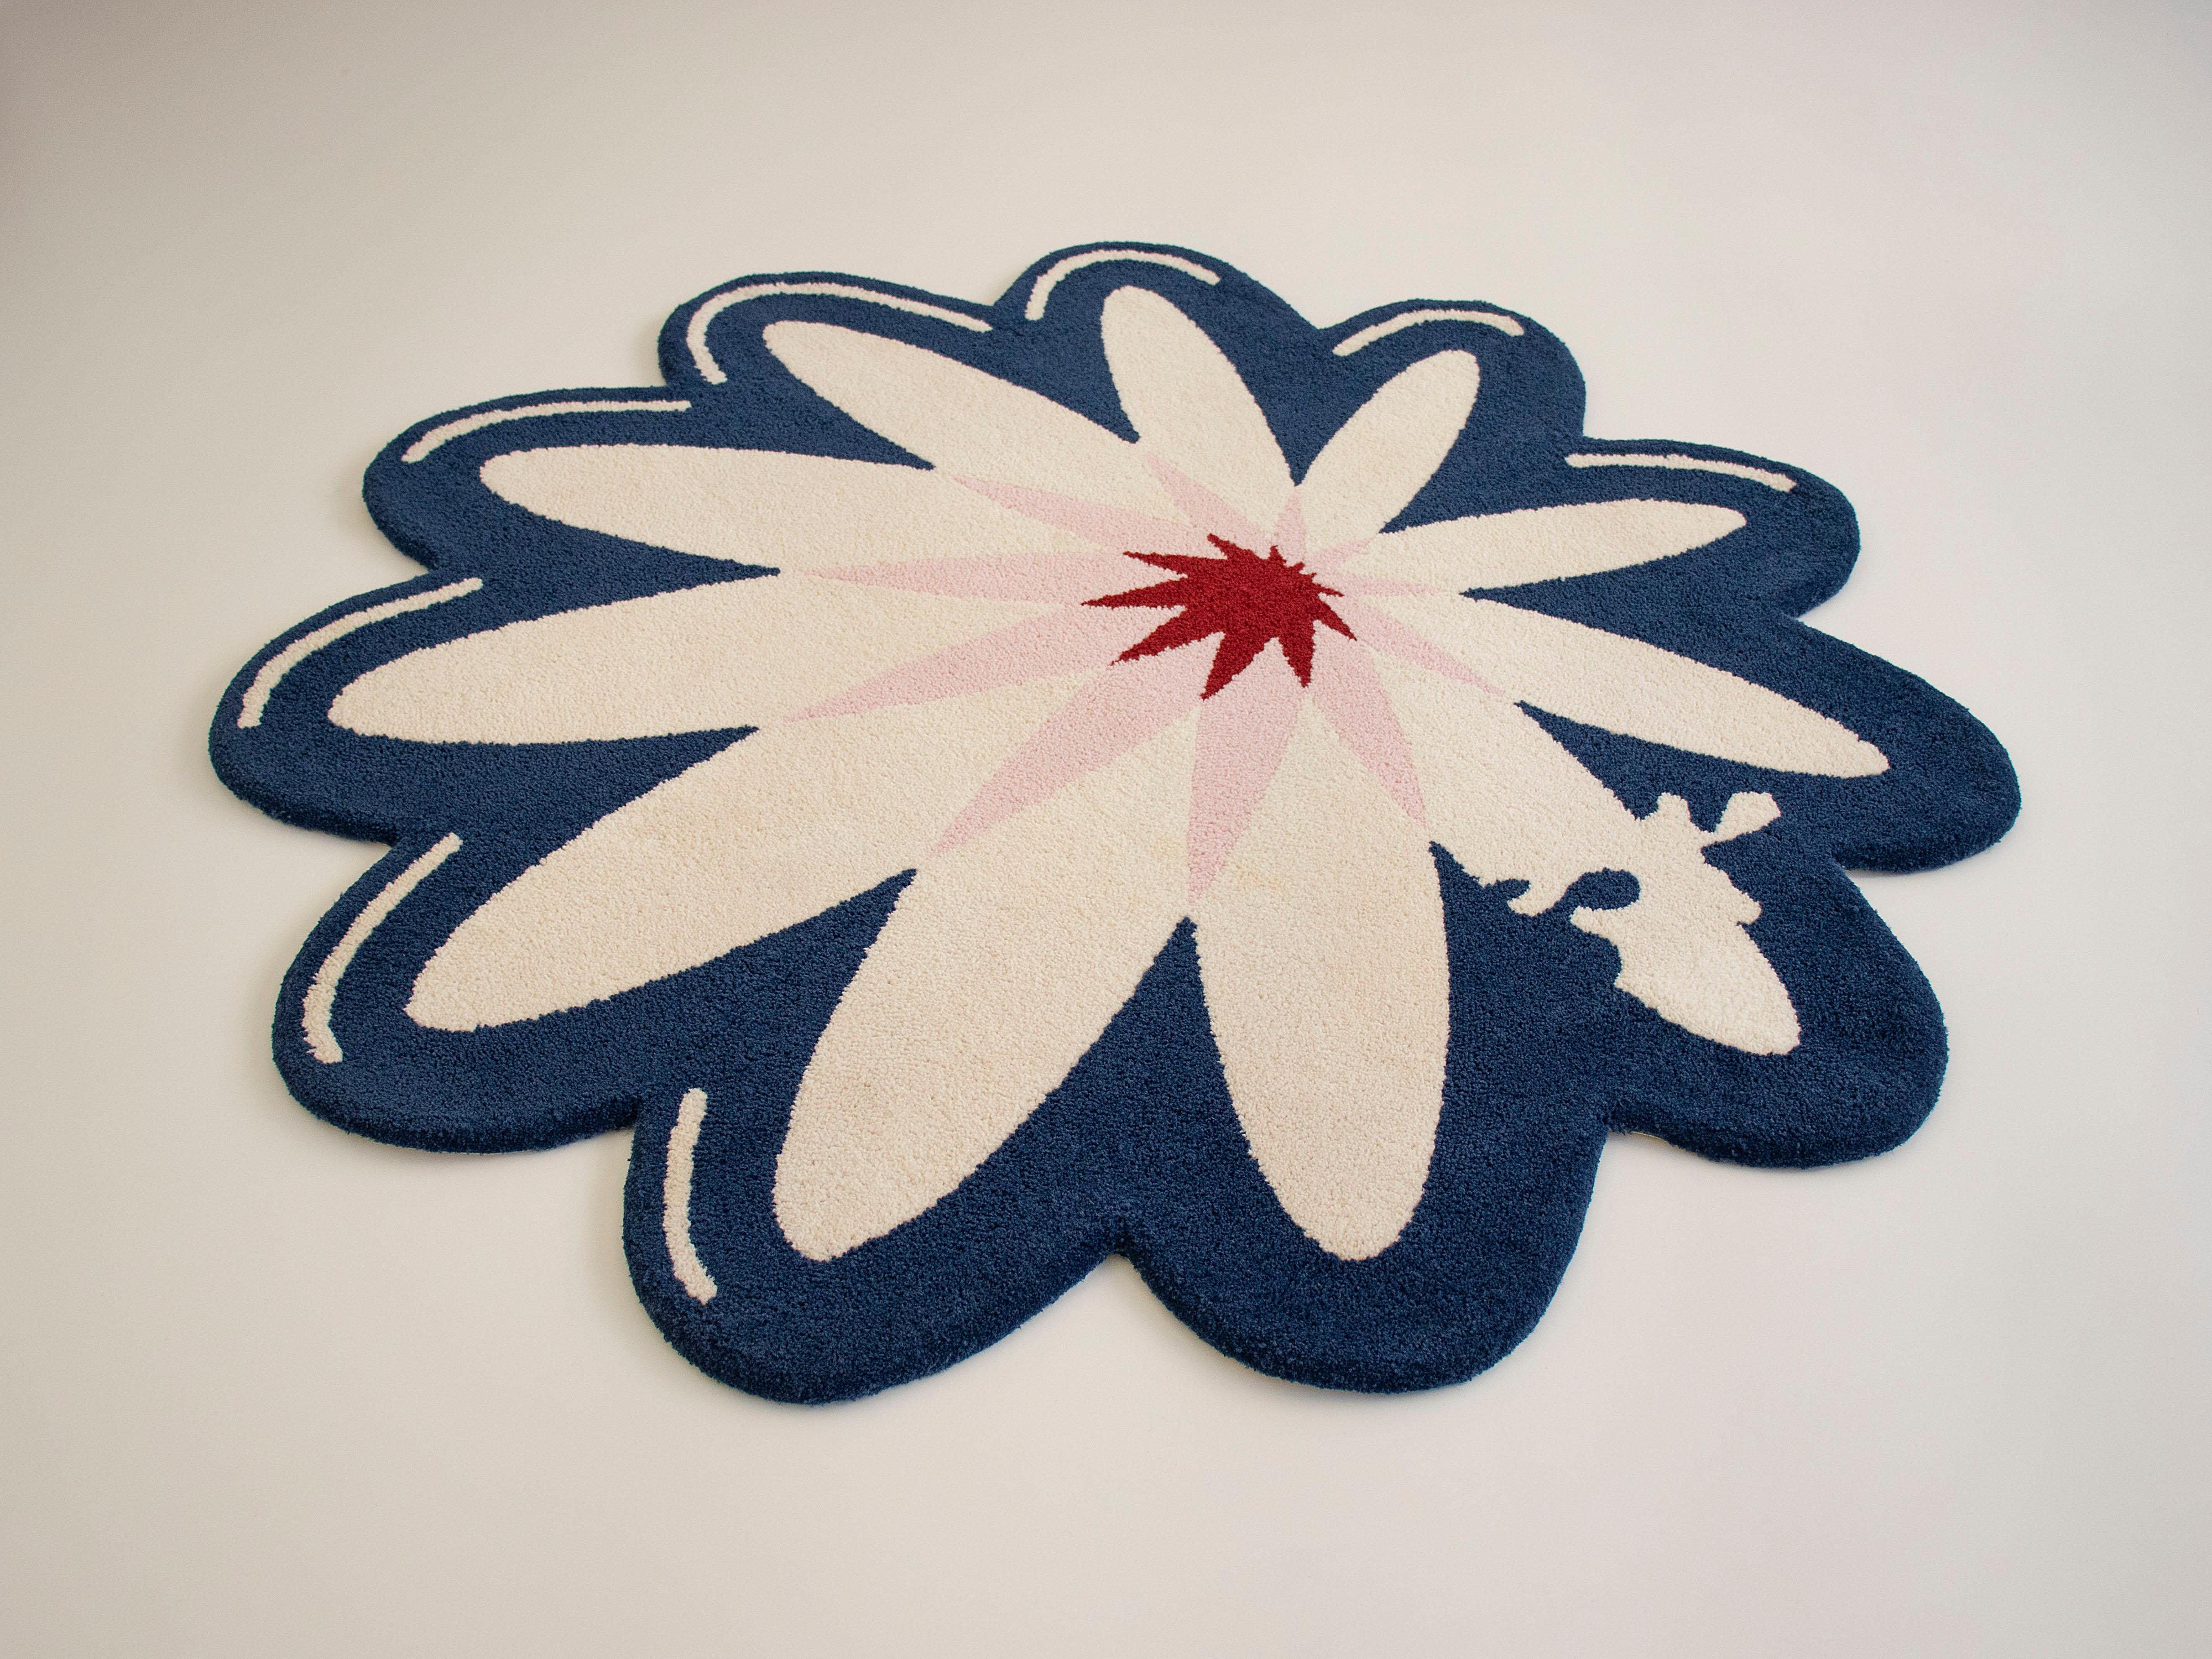 Machine-Made Round Blue, White & Red Flower Rug from Graffiti Collection by Paulo Kobylka For Sale